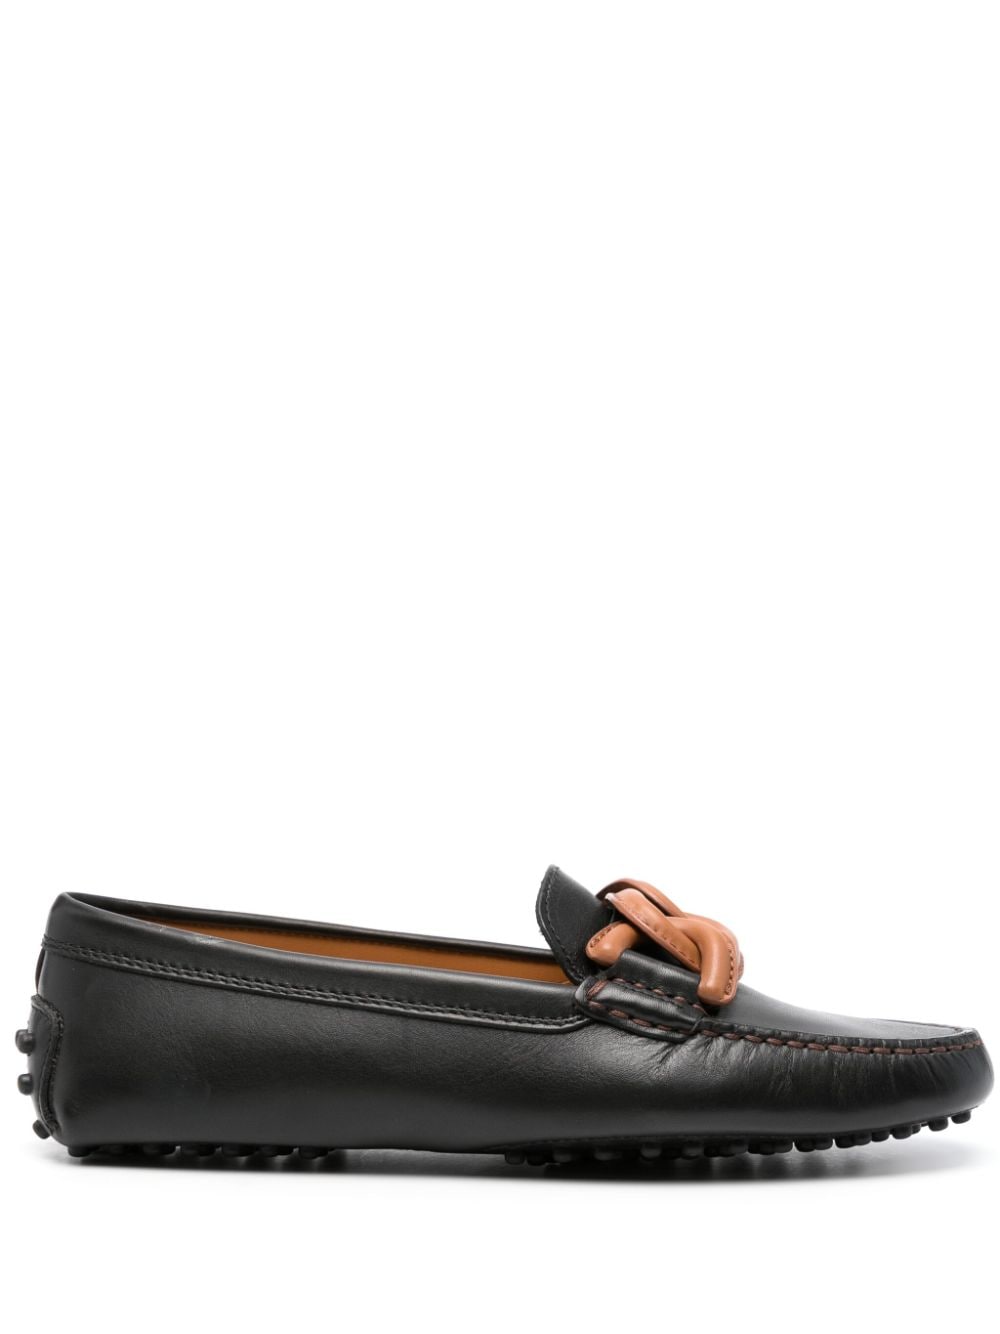 TOD'S Black Leather Driving Shoes For Women